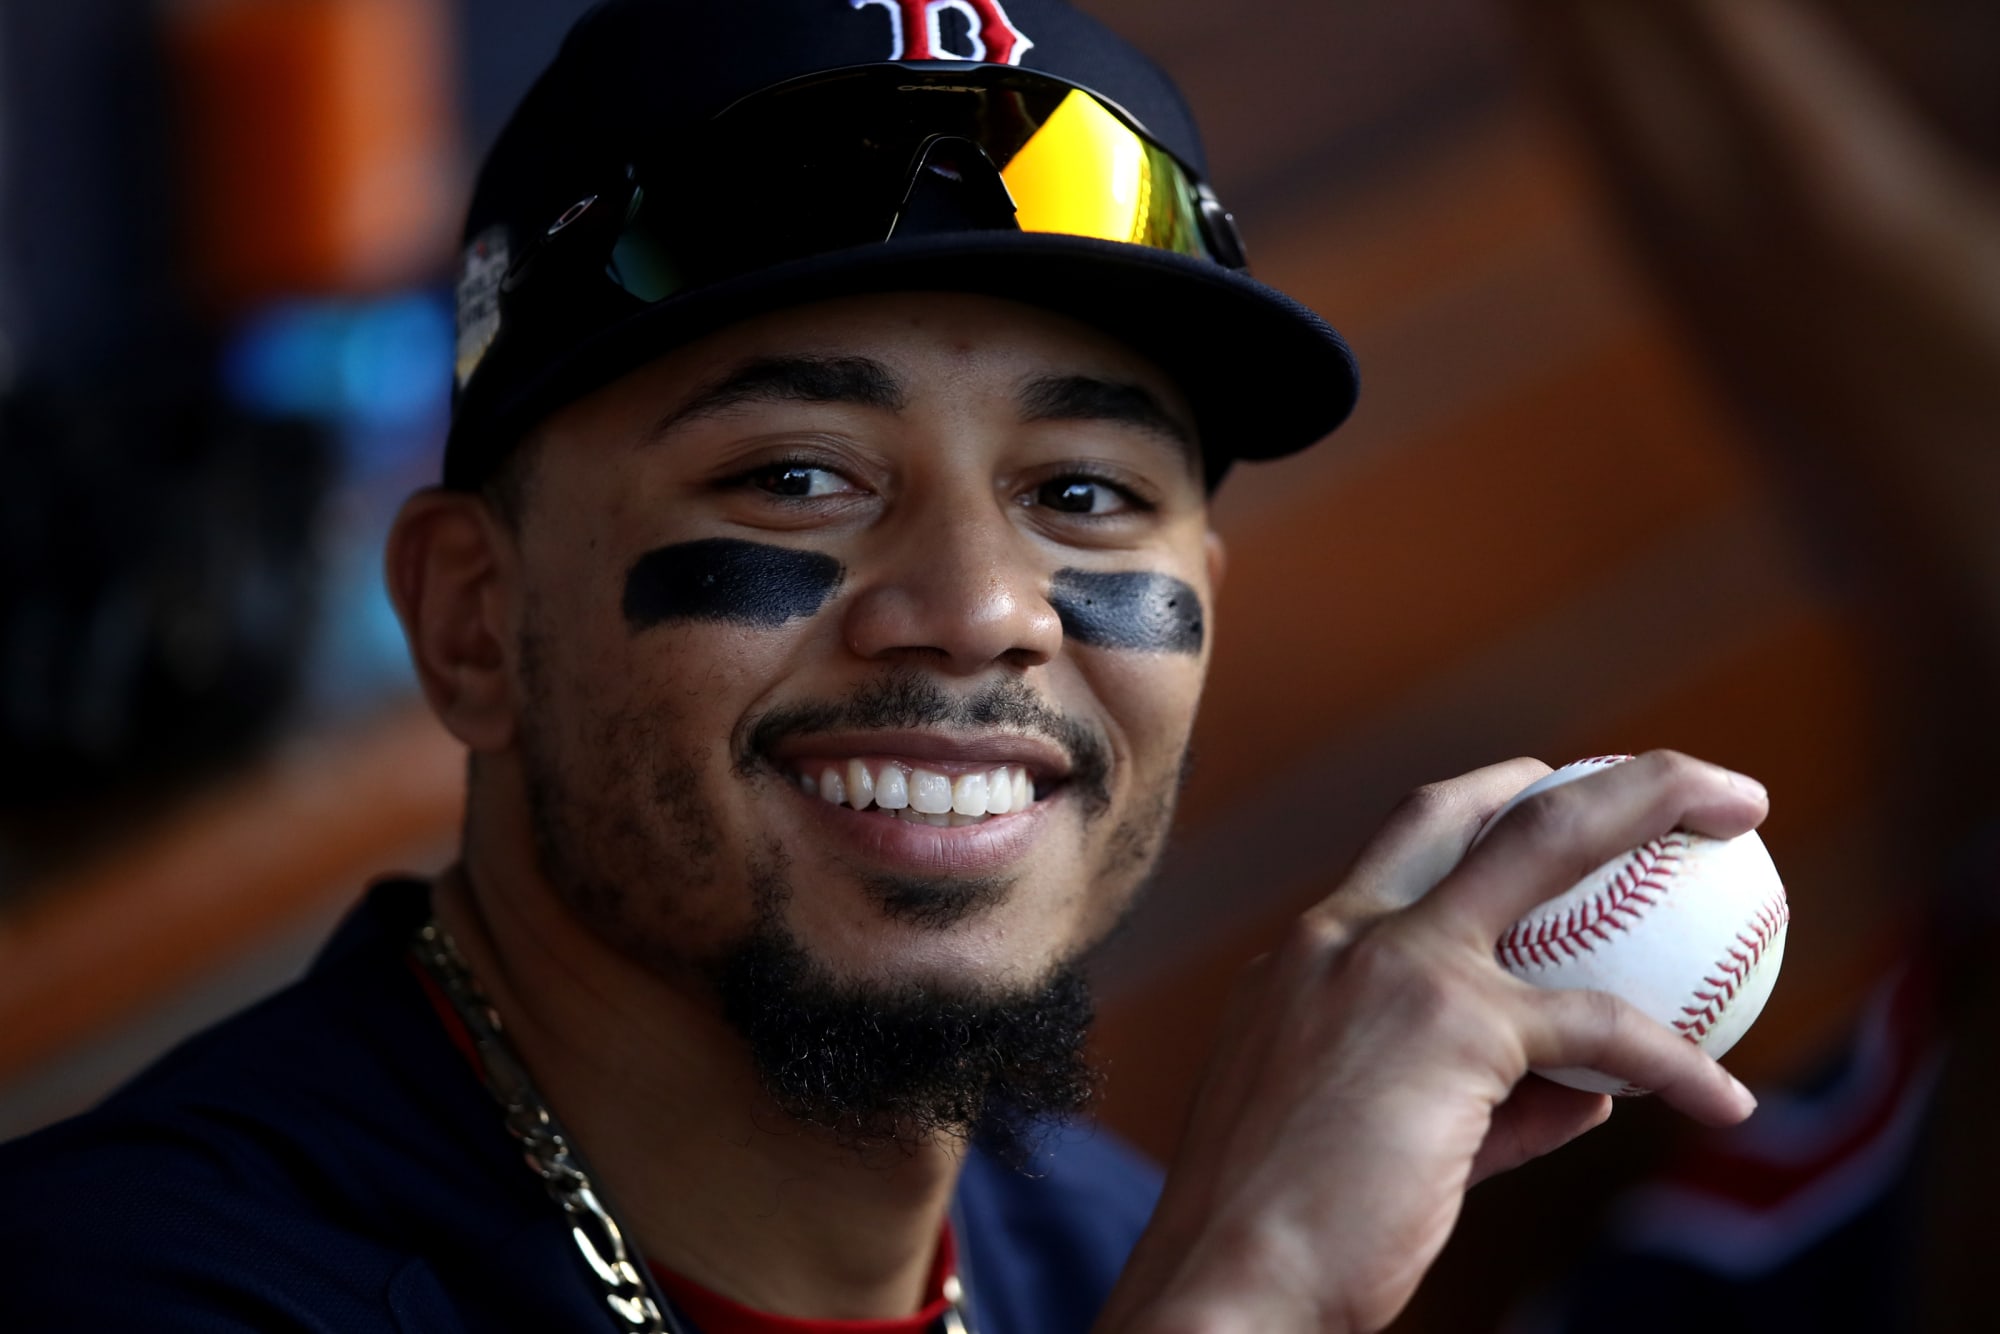 Red Sox right fielder Mookie Betts wins another Gold Glove